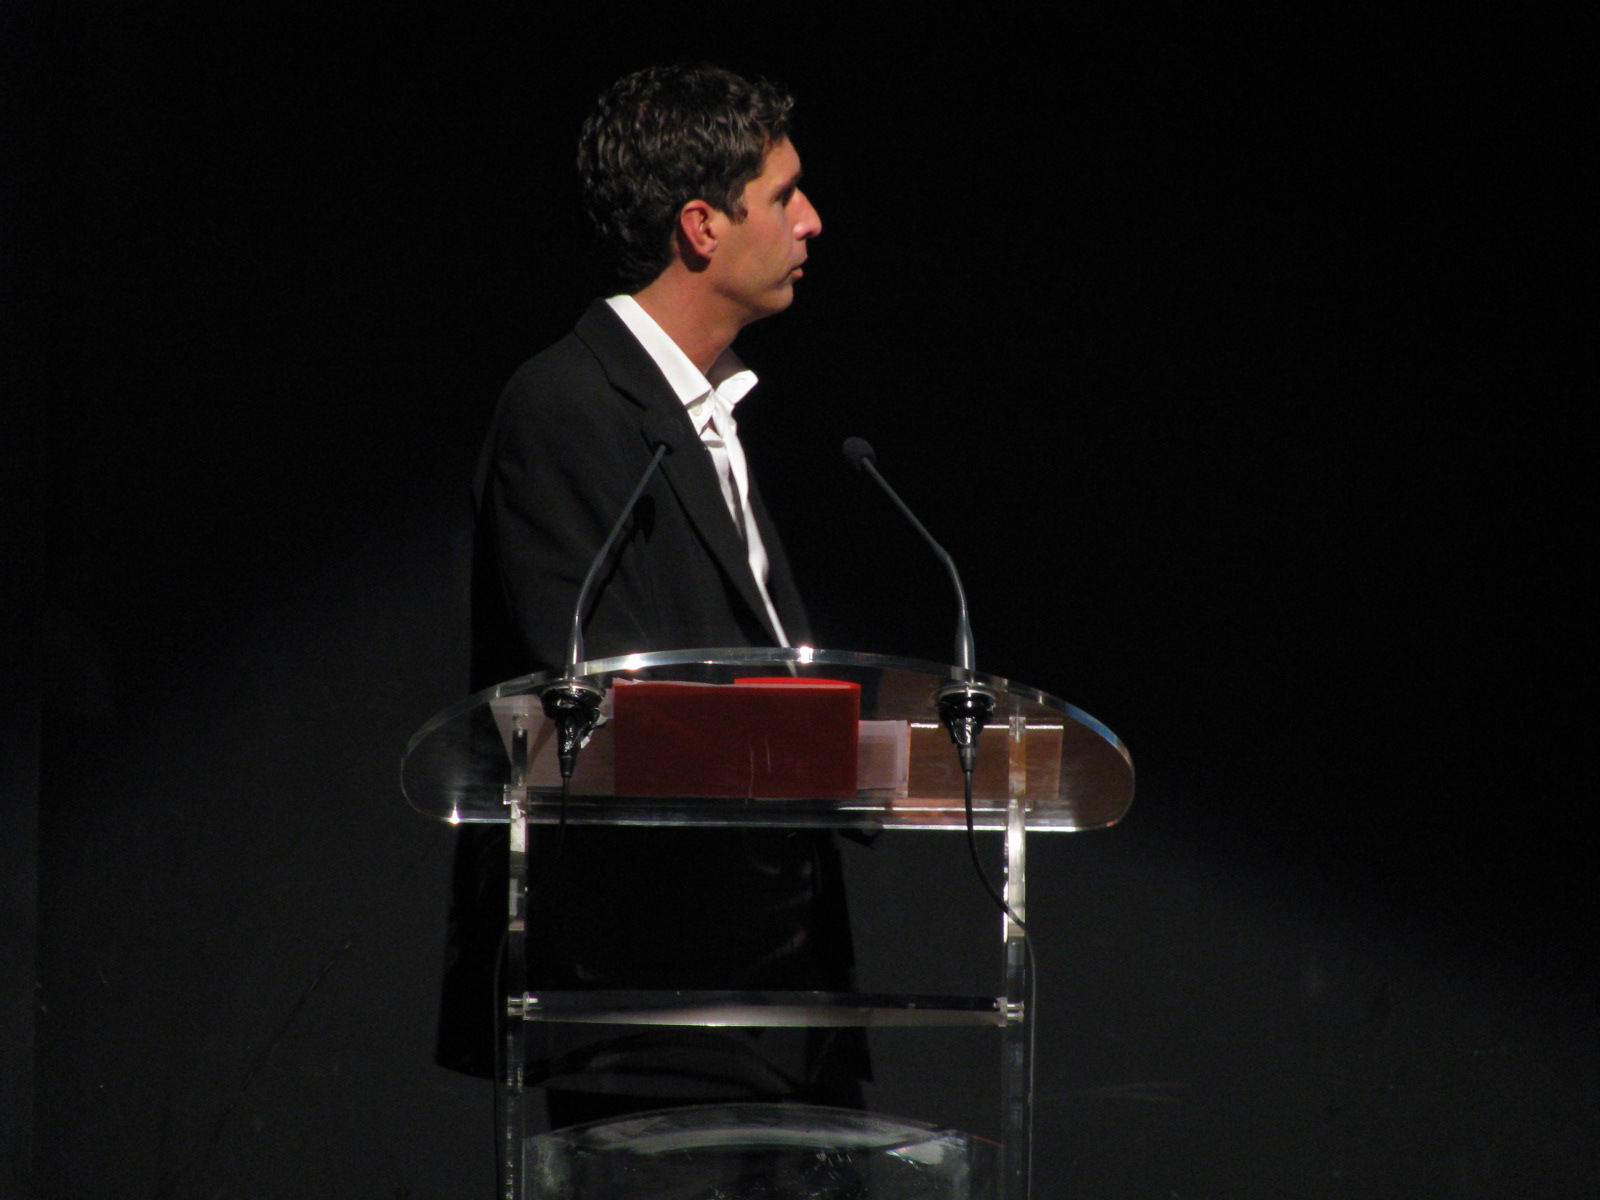 a man speaking from a podium in front of a dark background